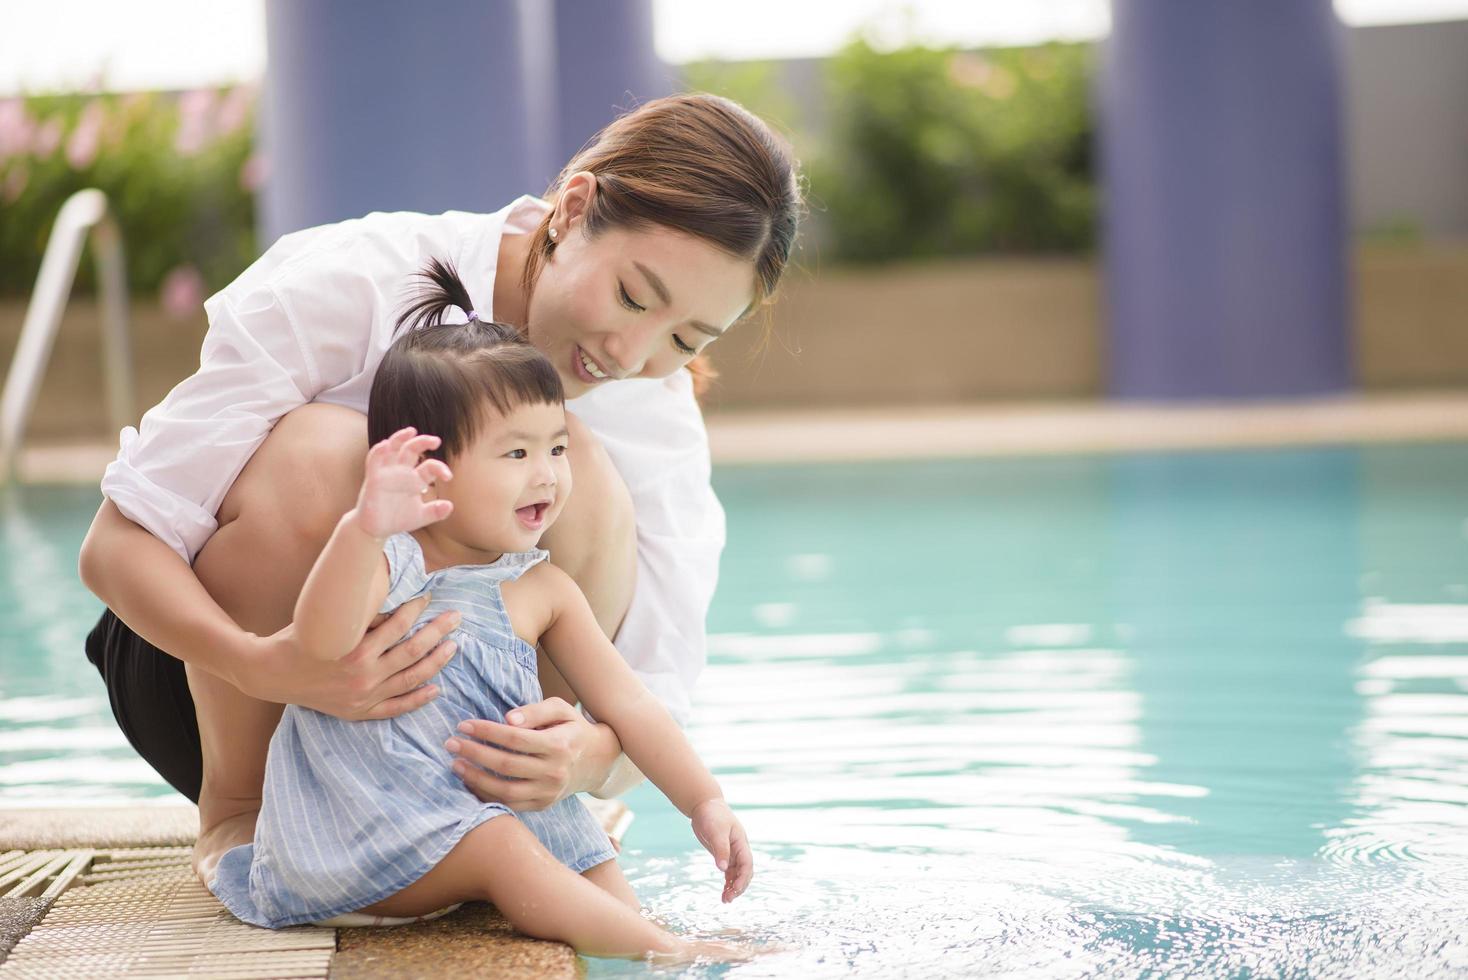 A Happy Asian mother and daughter are enjoy swimming in pool , lifestyle, parenthood, family concept photo